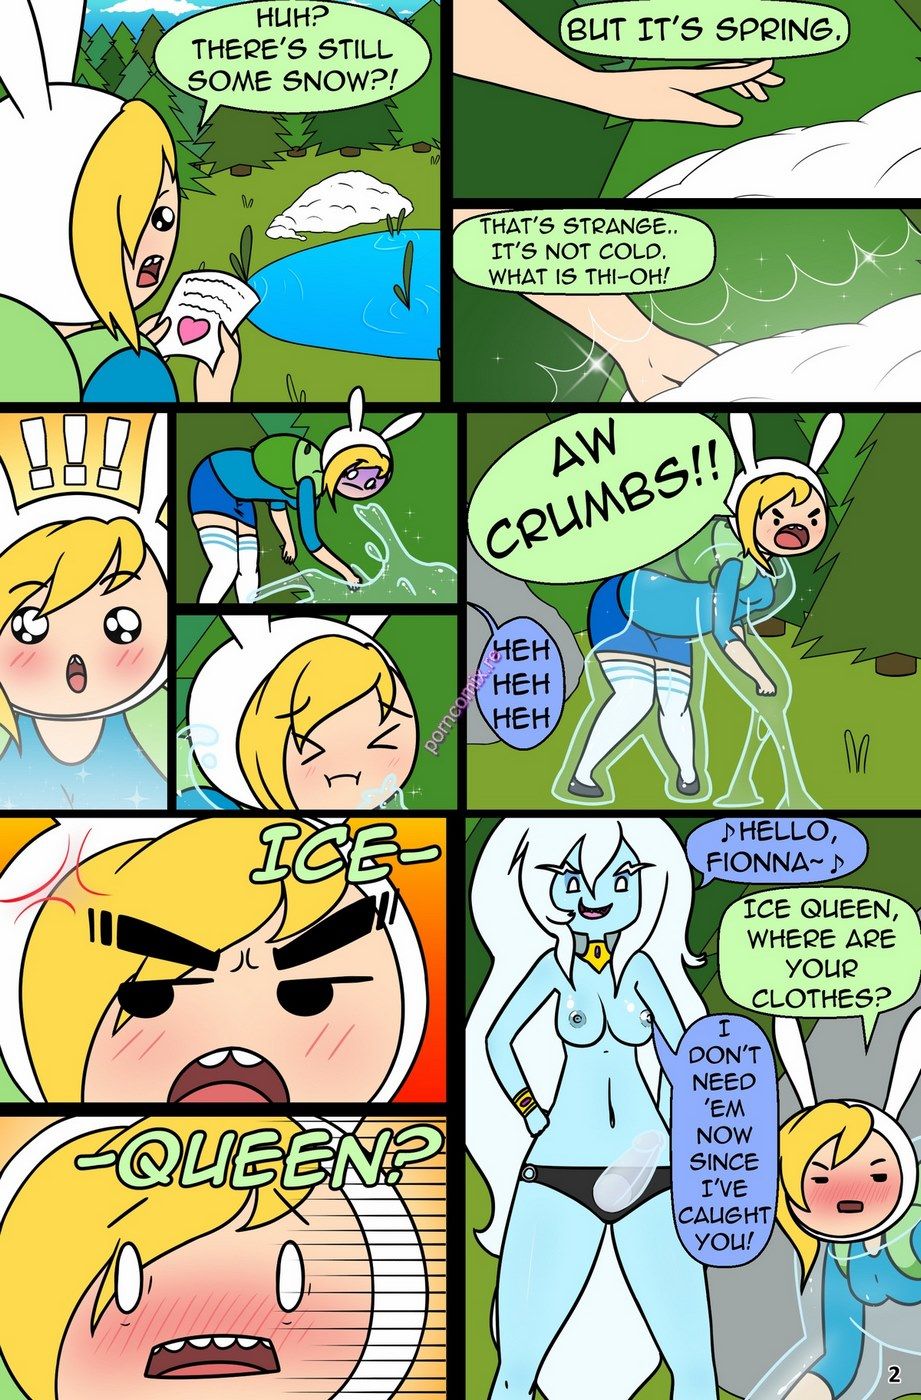 [cubbychambers]_MisAdventure_Time_Spring_Special comix_59787.jpg